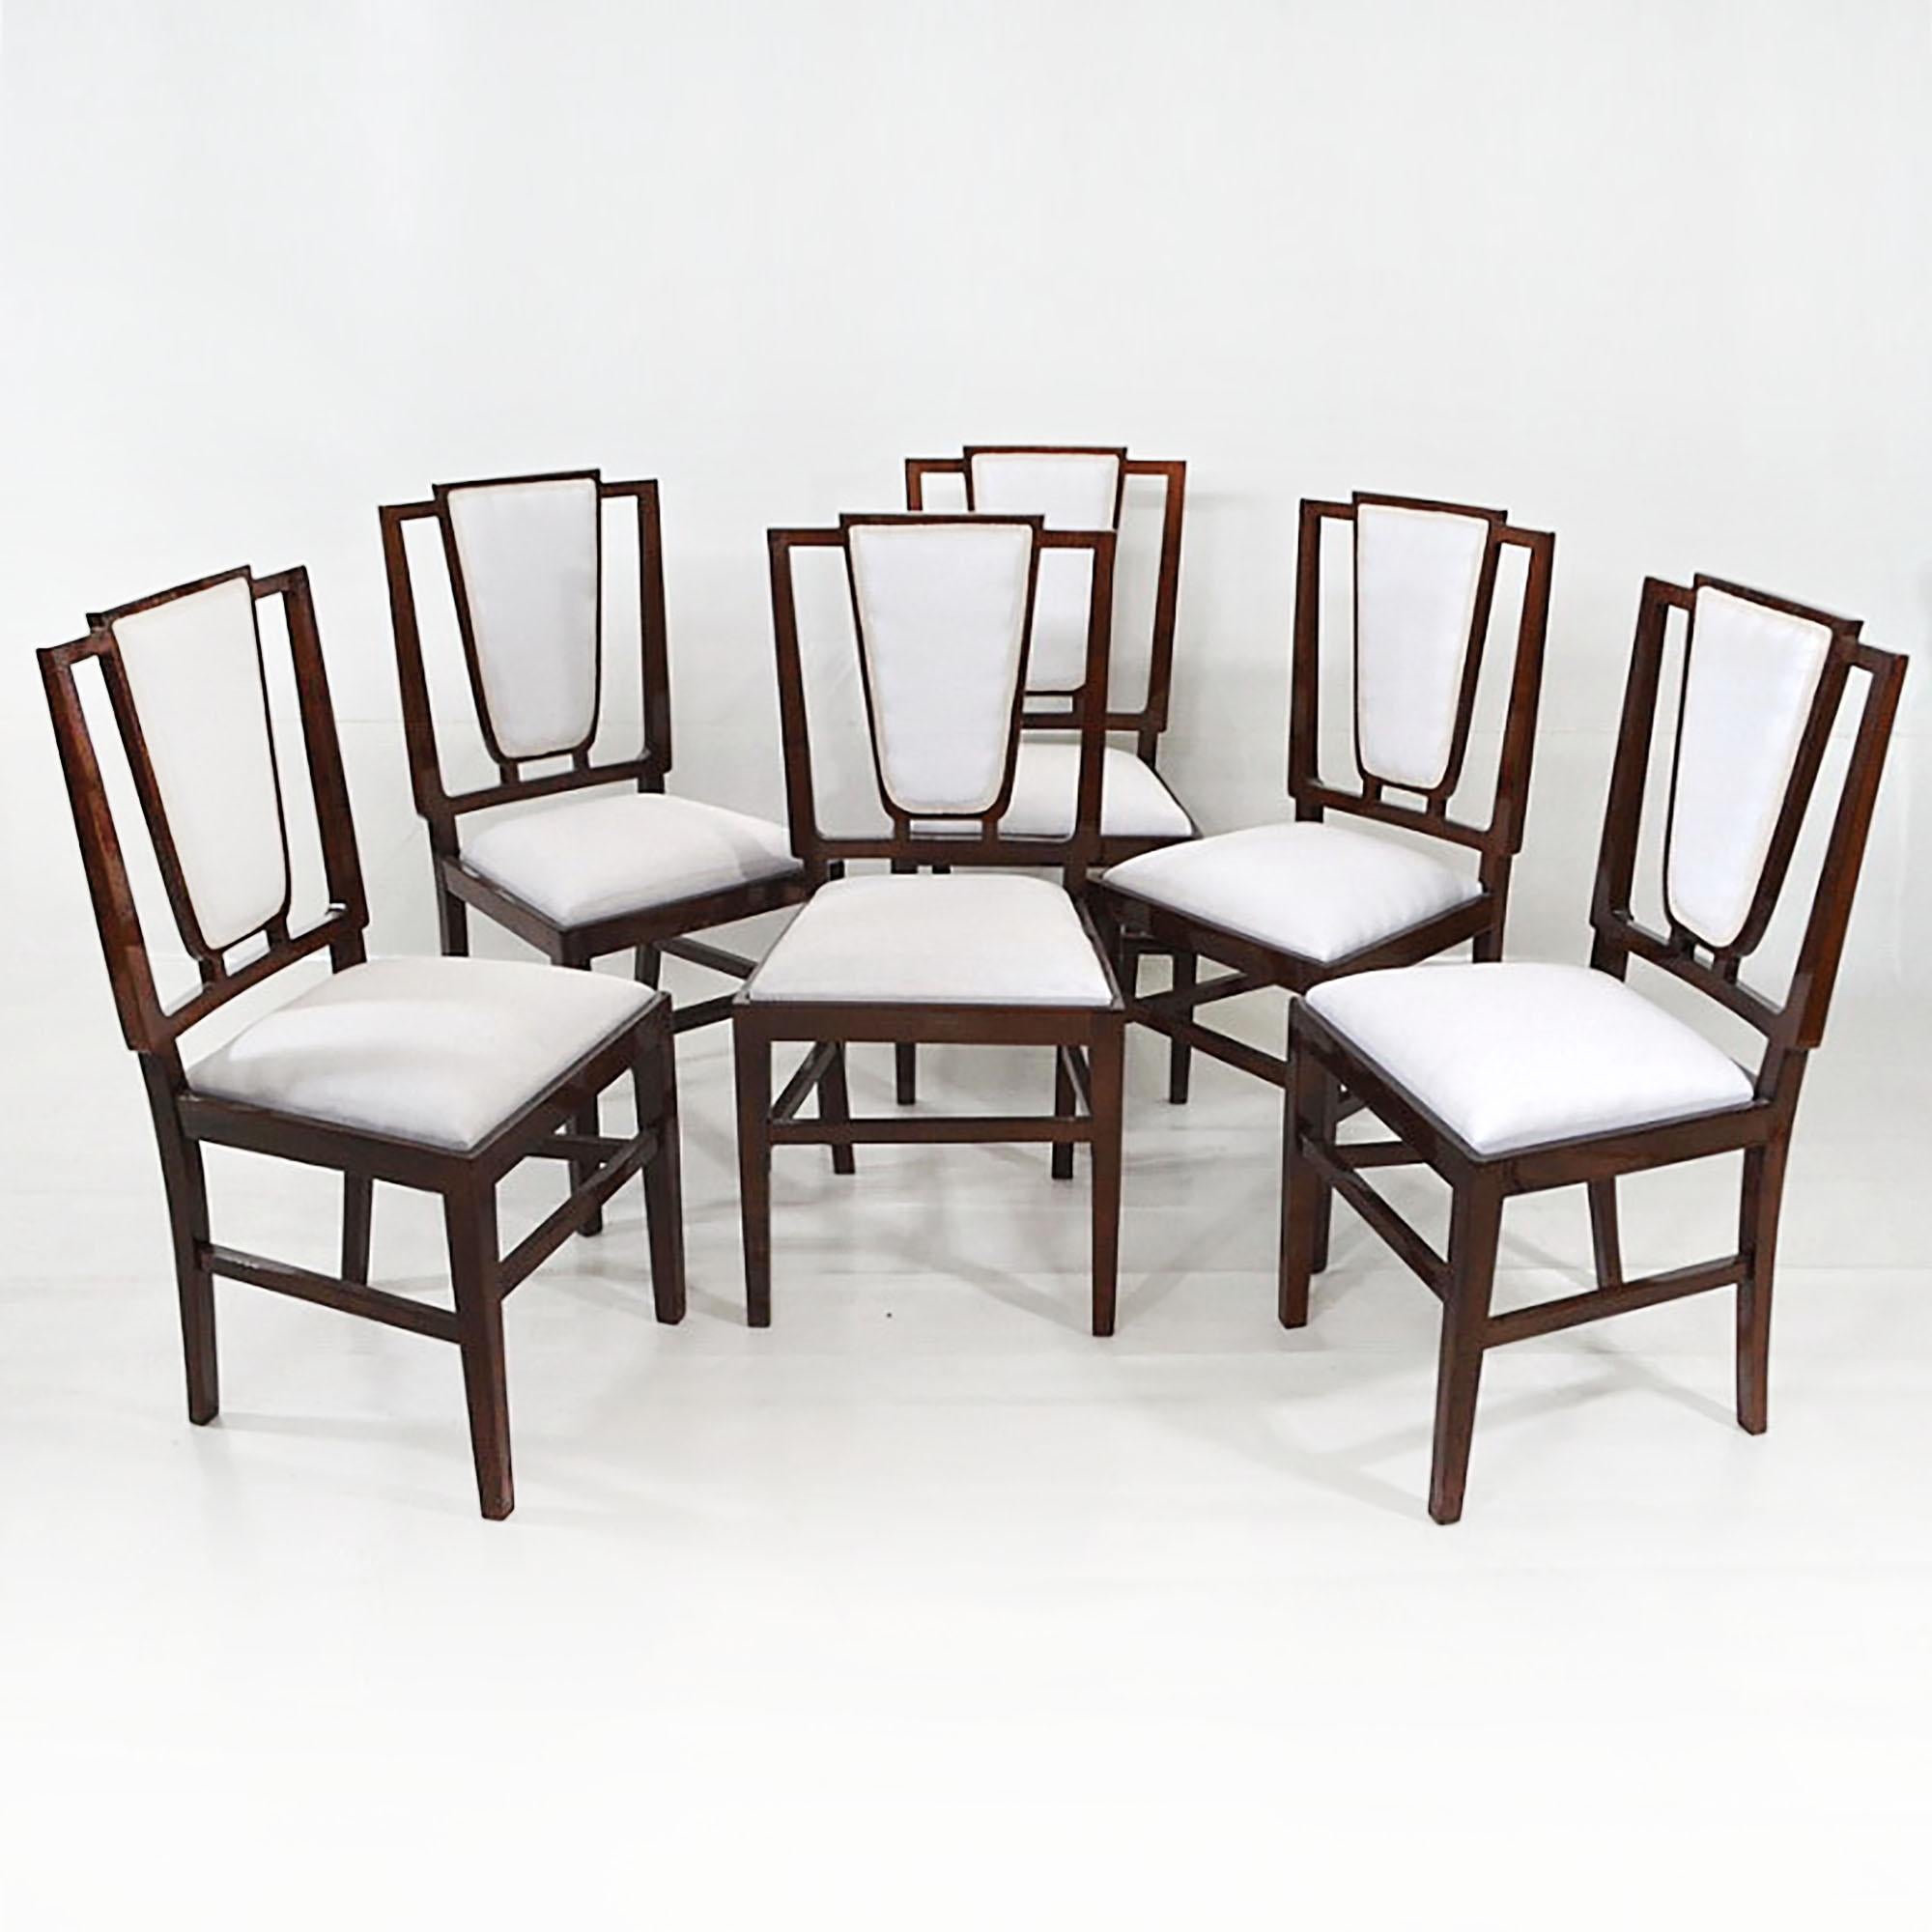 Art Deco French Dining Room Set Table and Six Chairs, Design Michel Dufet, 1930s For Sale 5